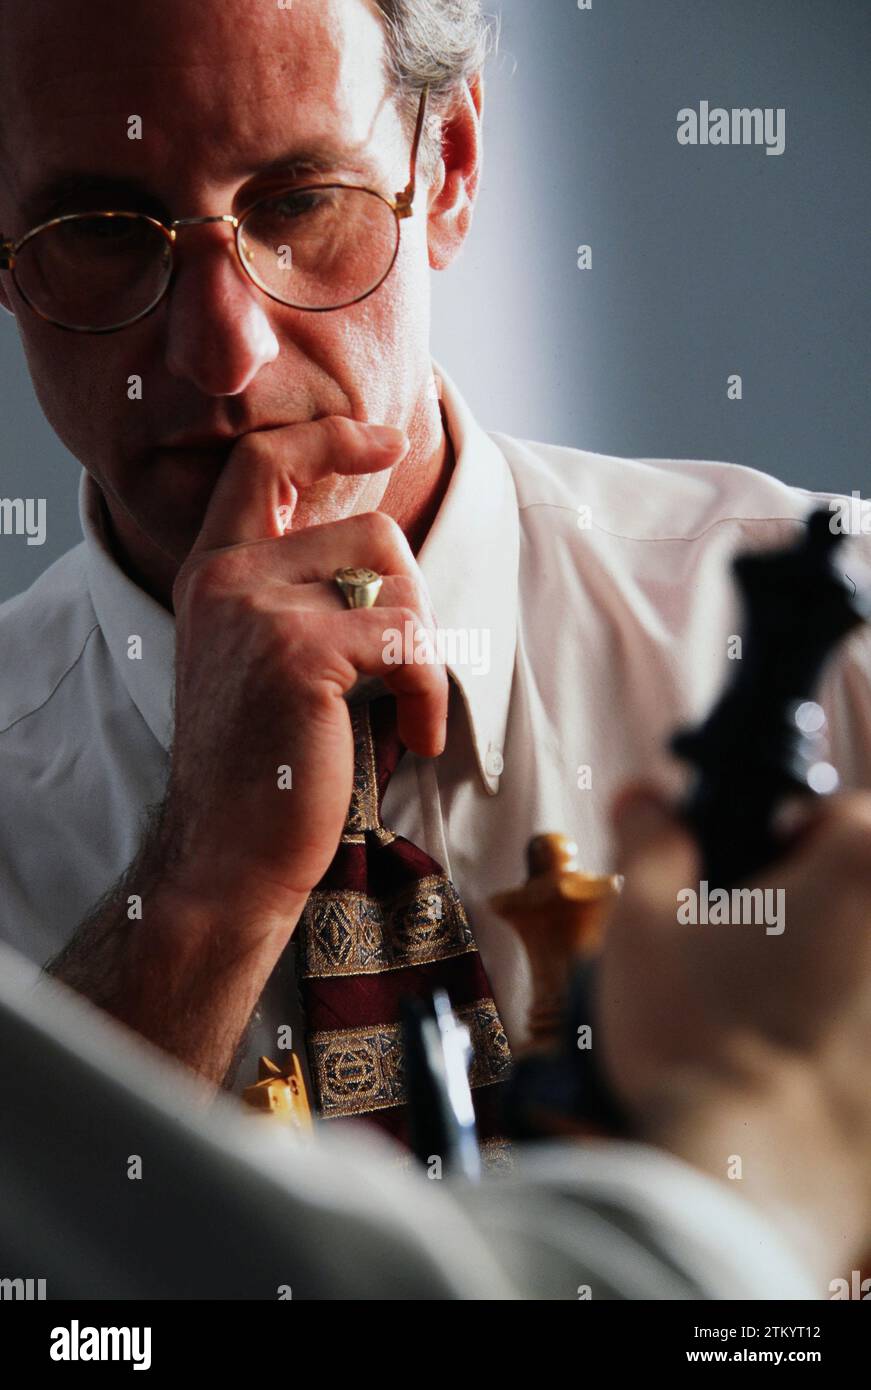 Businessman concentrating on a chess move while contemplating a chess move Stock Photo